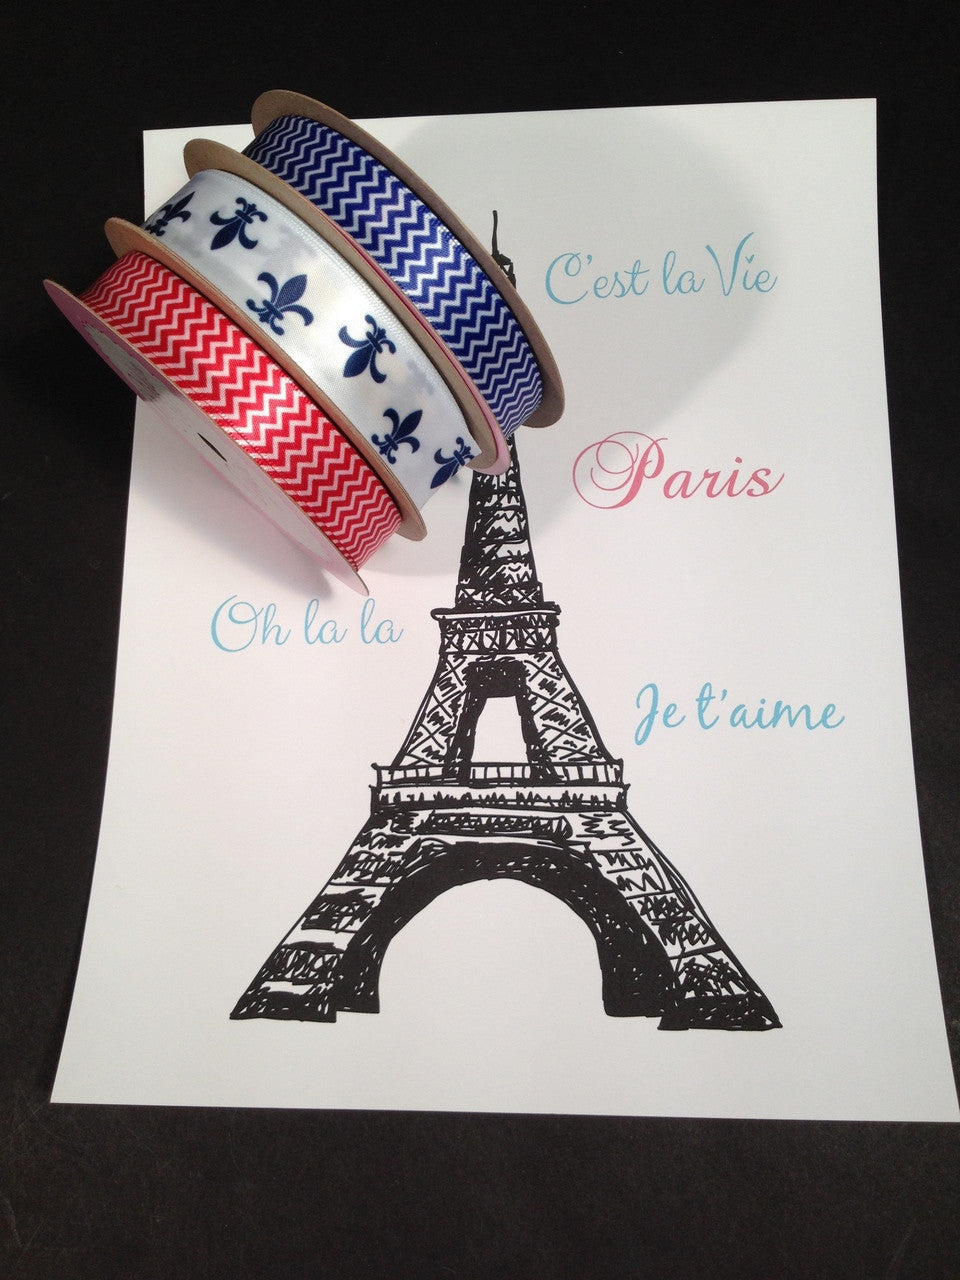 Say Oui! to our classic French Fleur di Lis ribbon in Navy blue and white!